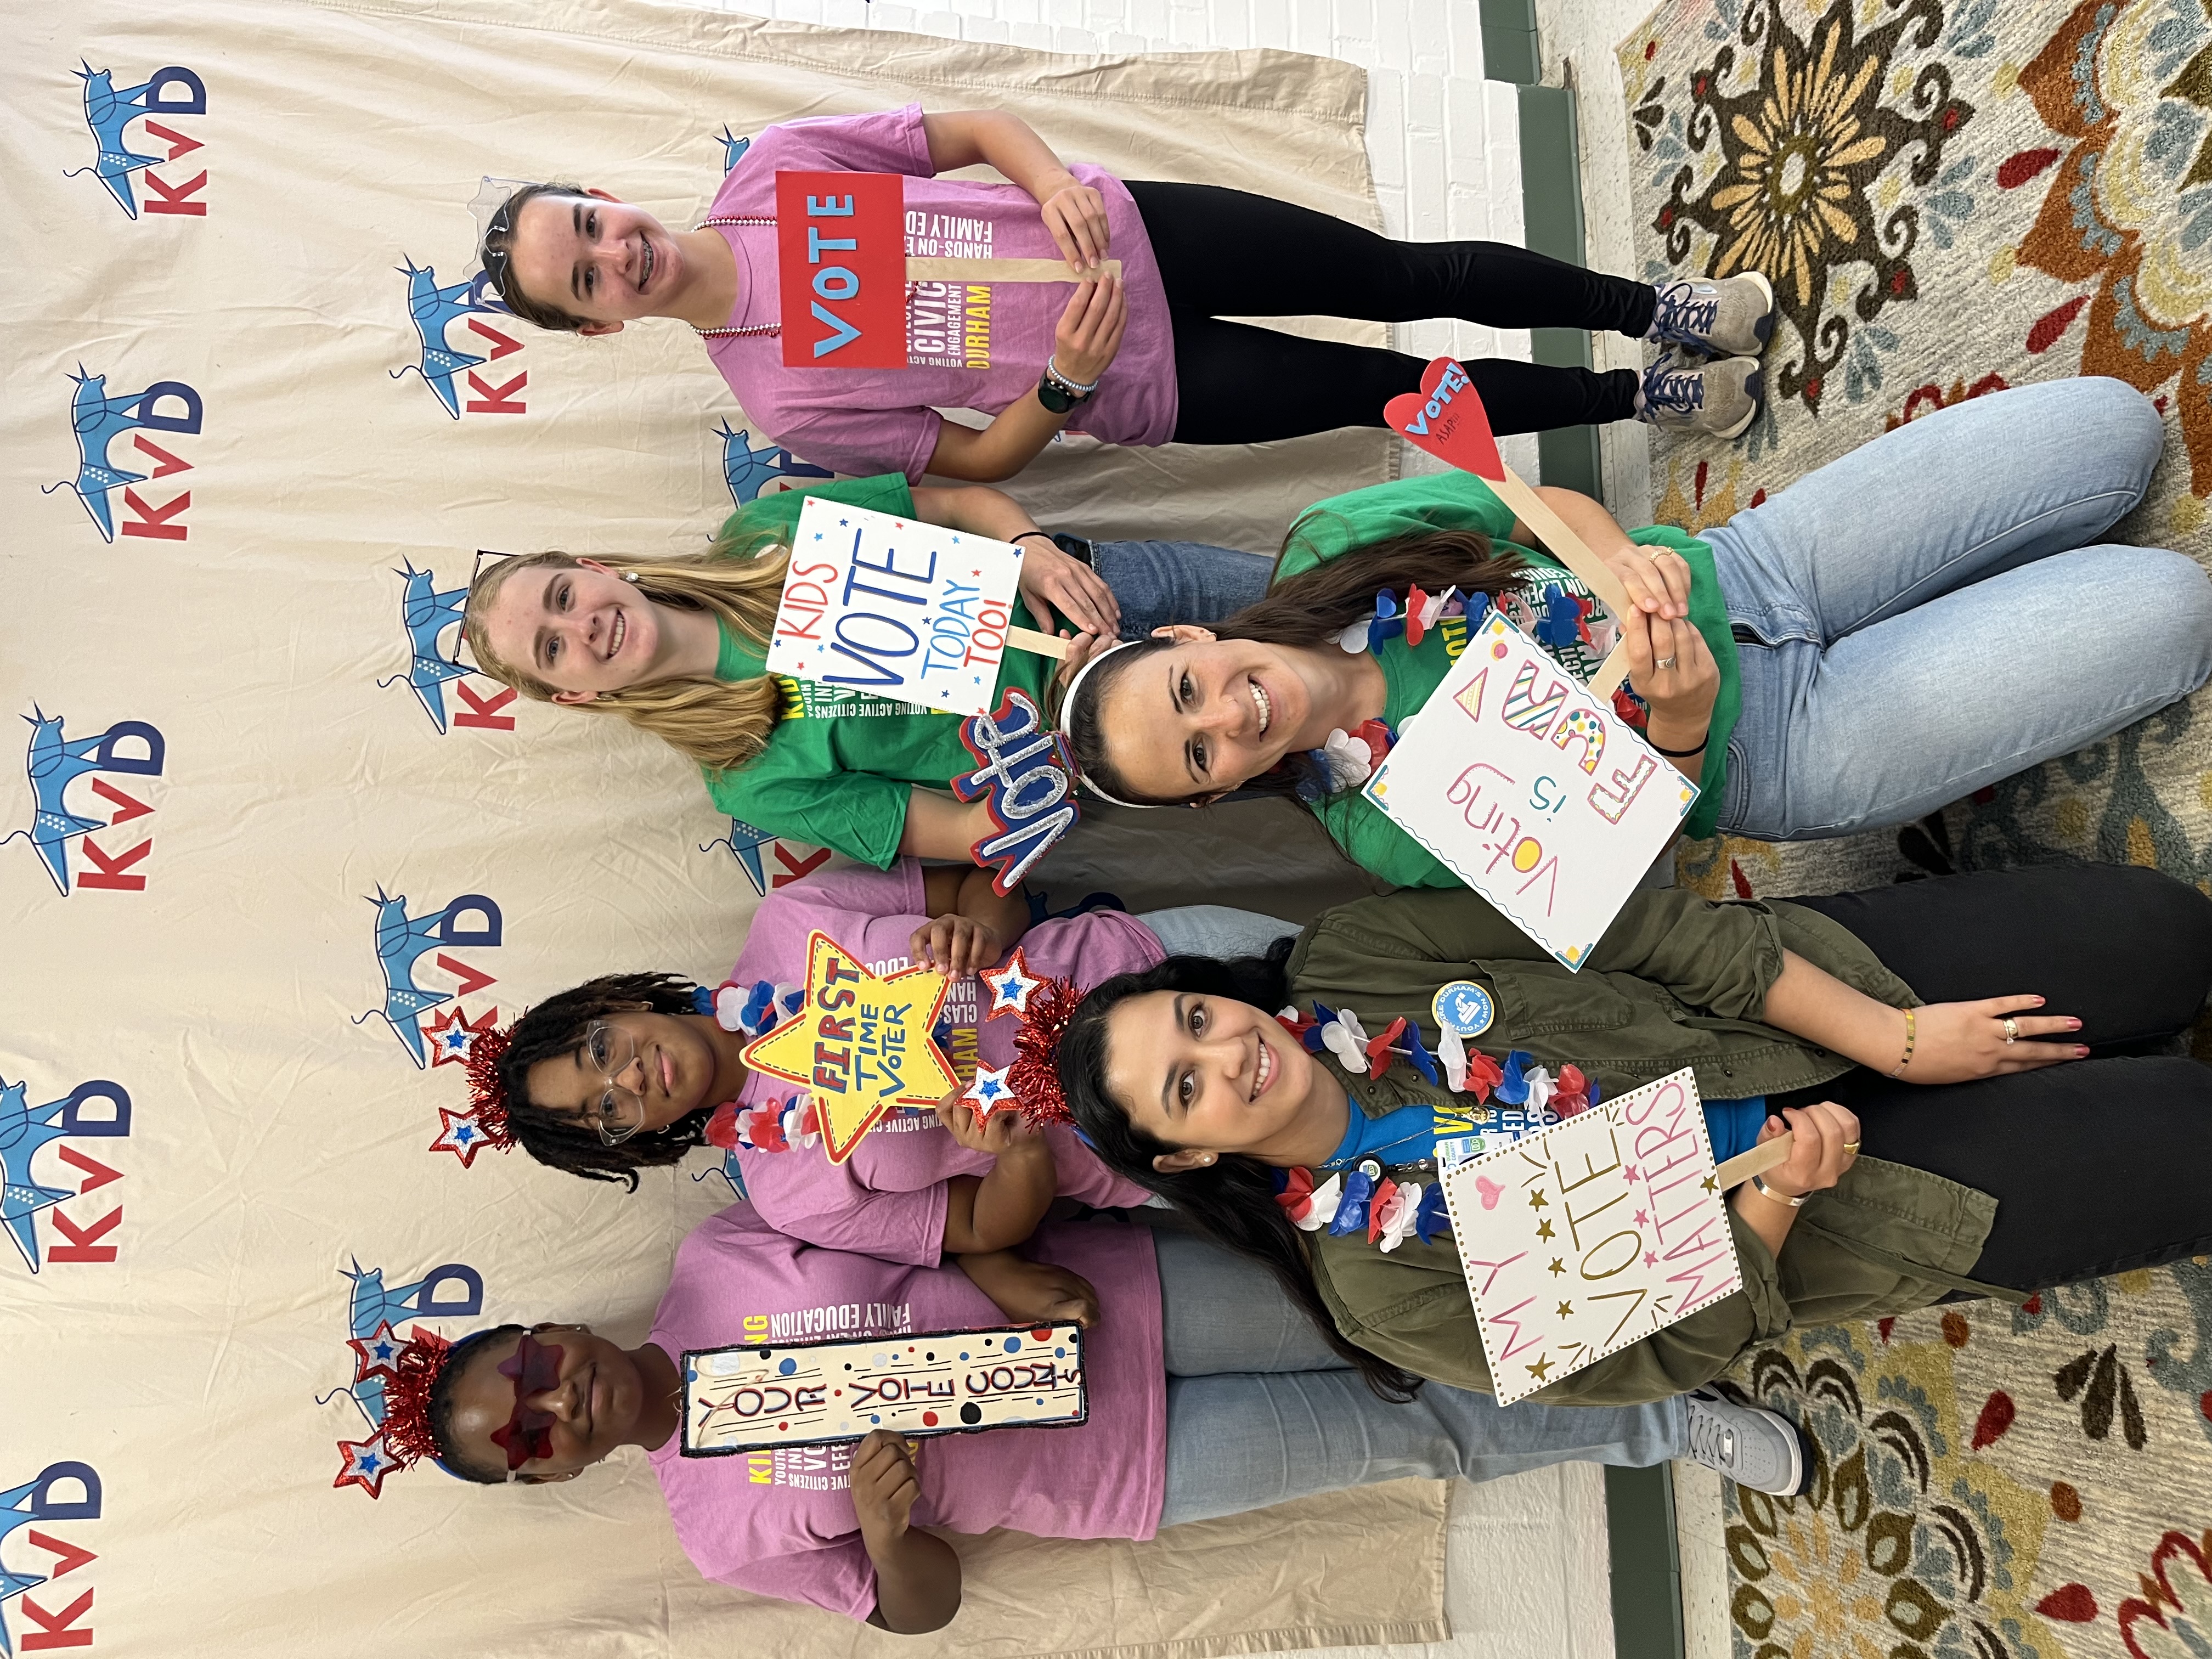 A group of girls hold signs encouraging others to vote.